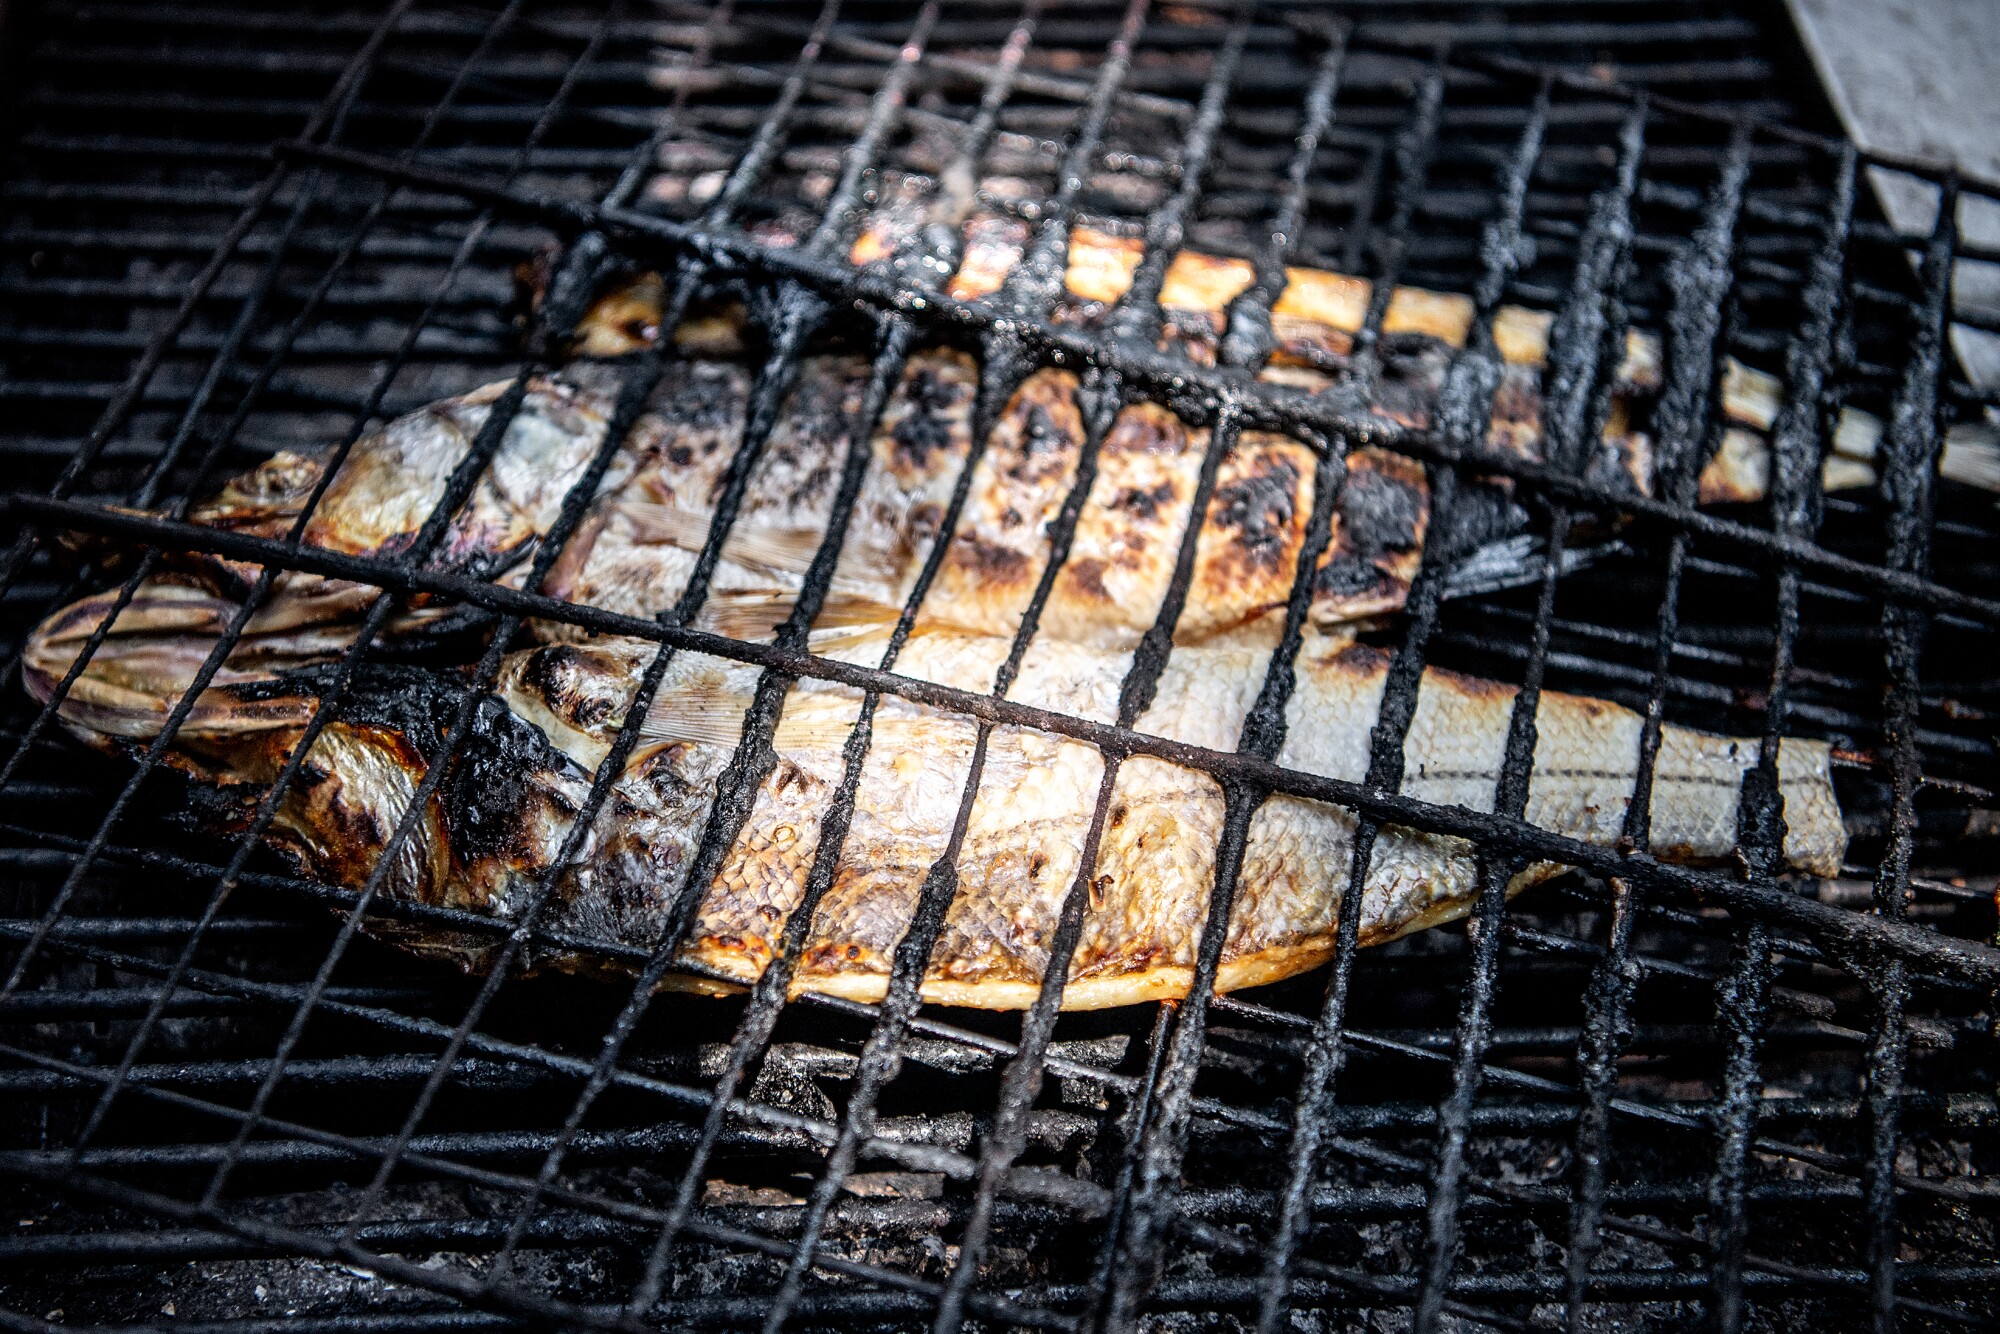 Snook on the grill at 106 Seafood Underground.